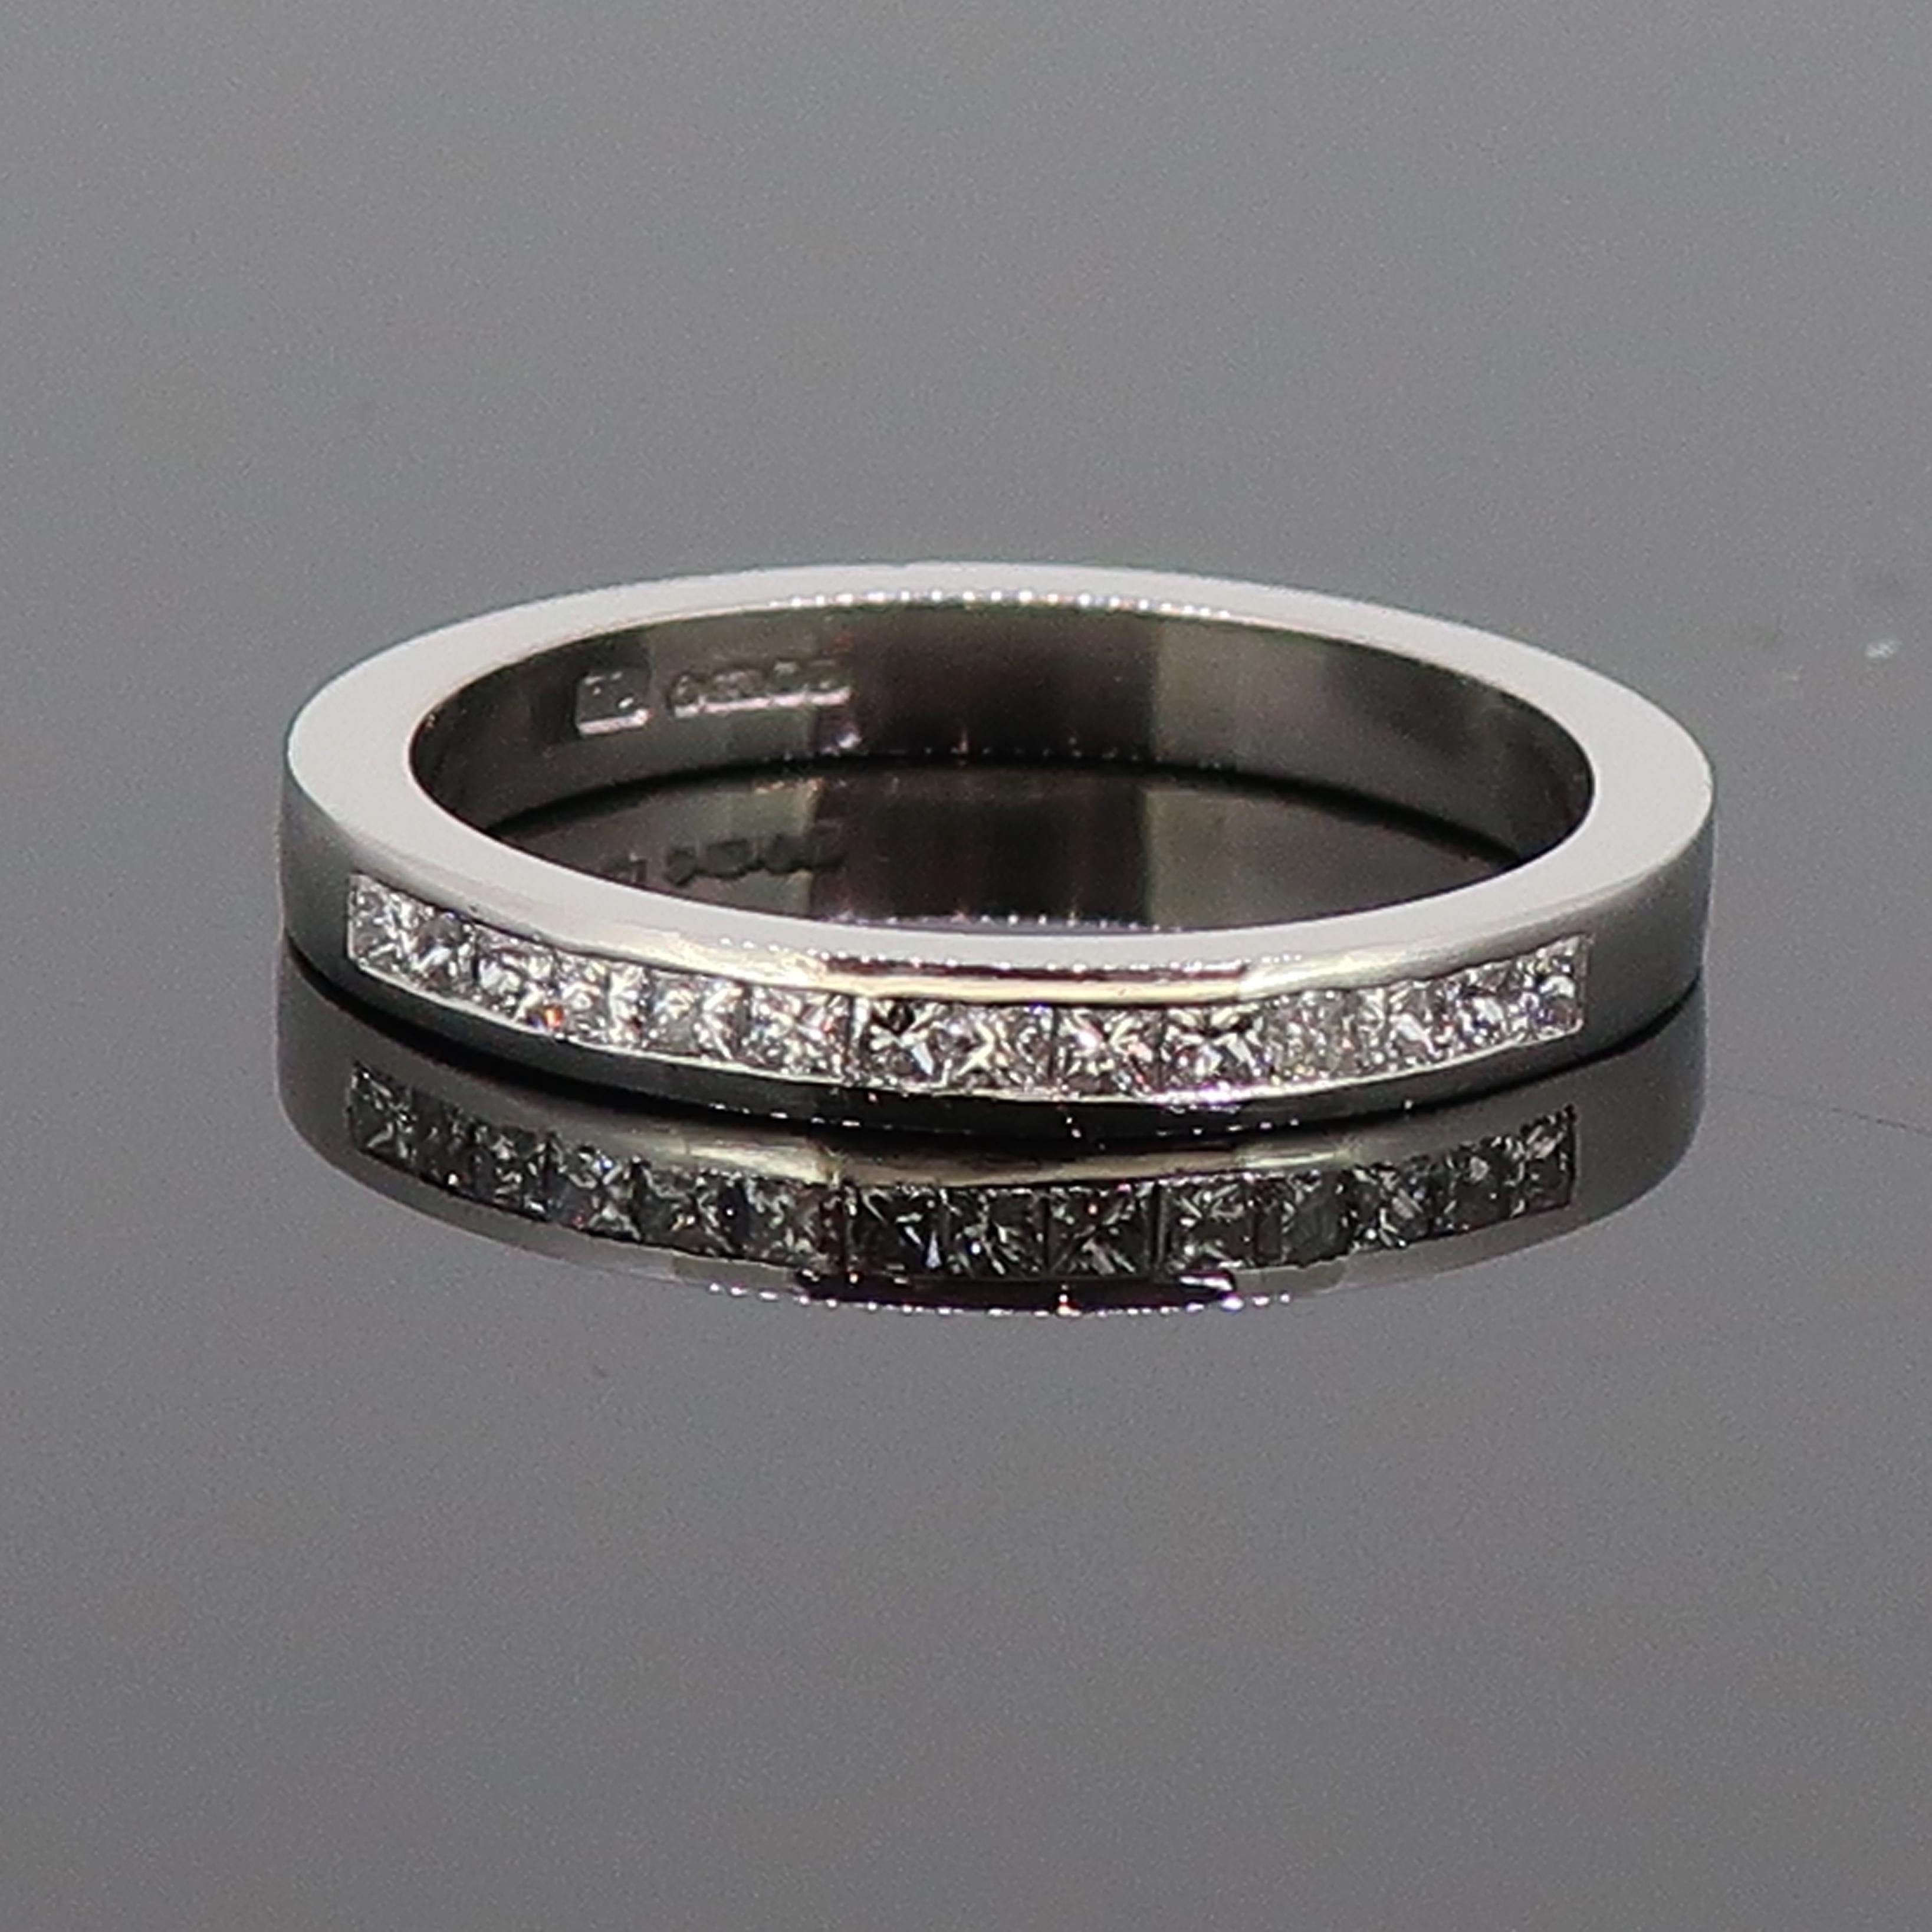 Platinum Princess Cut Diamond Eternity Band Ring

A delicate and dainty diamond eternity ring. The ring consists of fourteen small princess cut diamonds in a channel setting. Very low profile and sits flat on the finger. It would be a great stacking